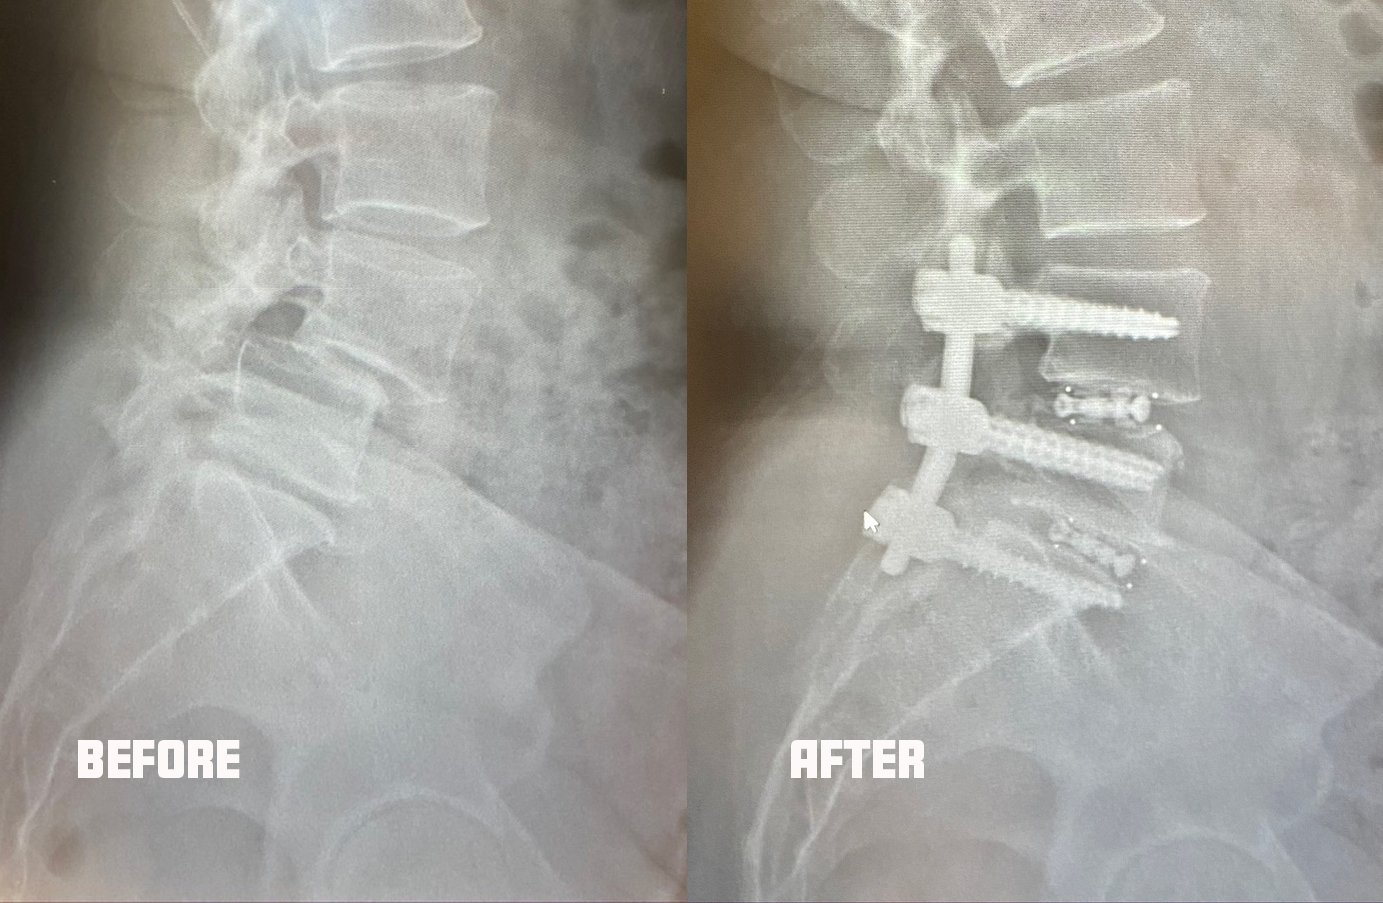 Katie's x-rays before and after